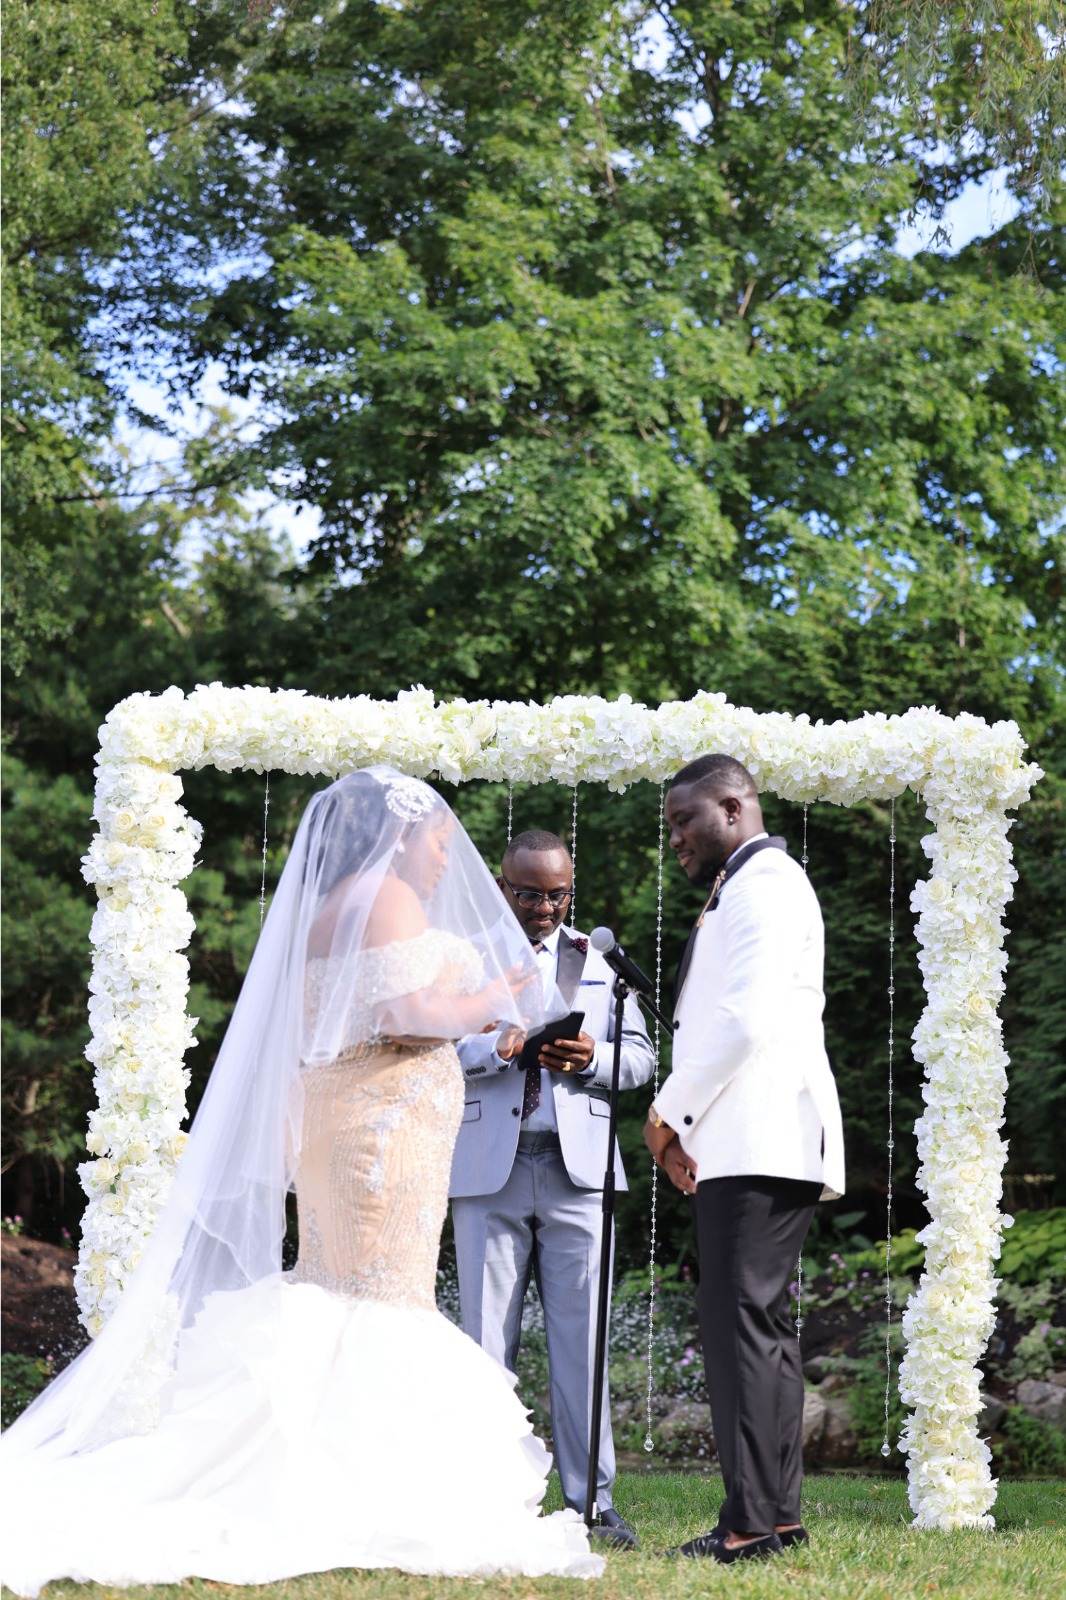 A groom and bride standing near reception gate.